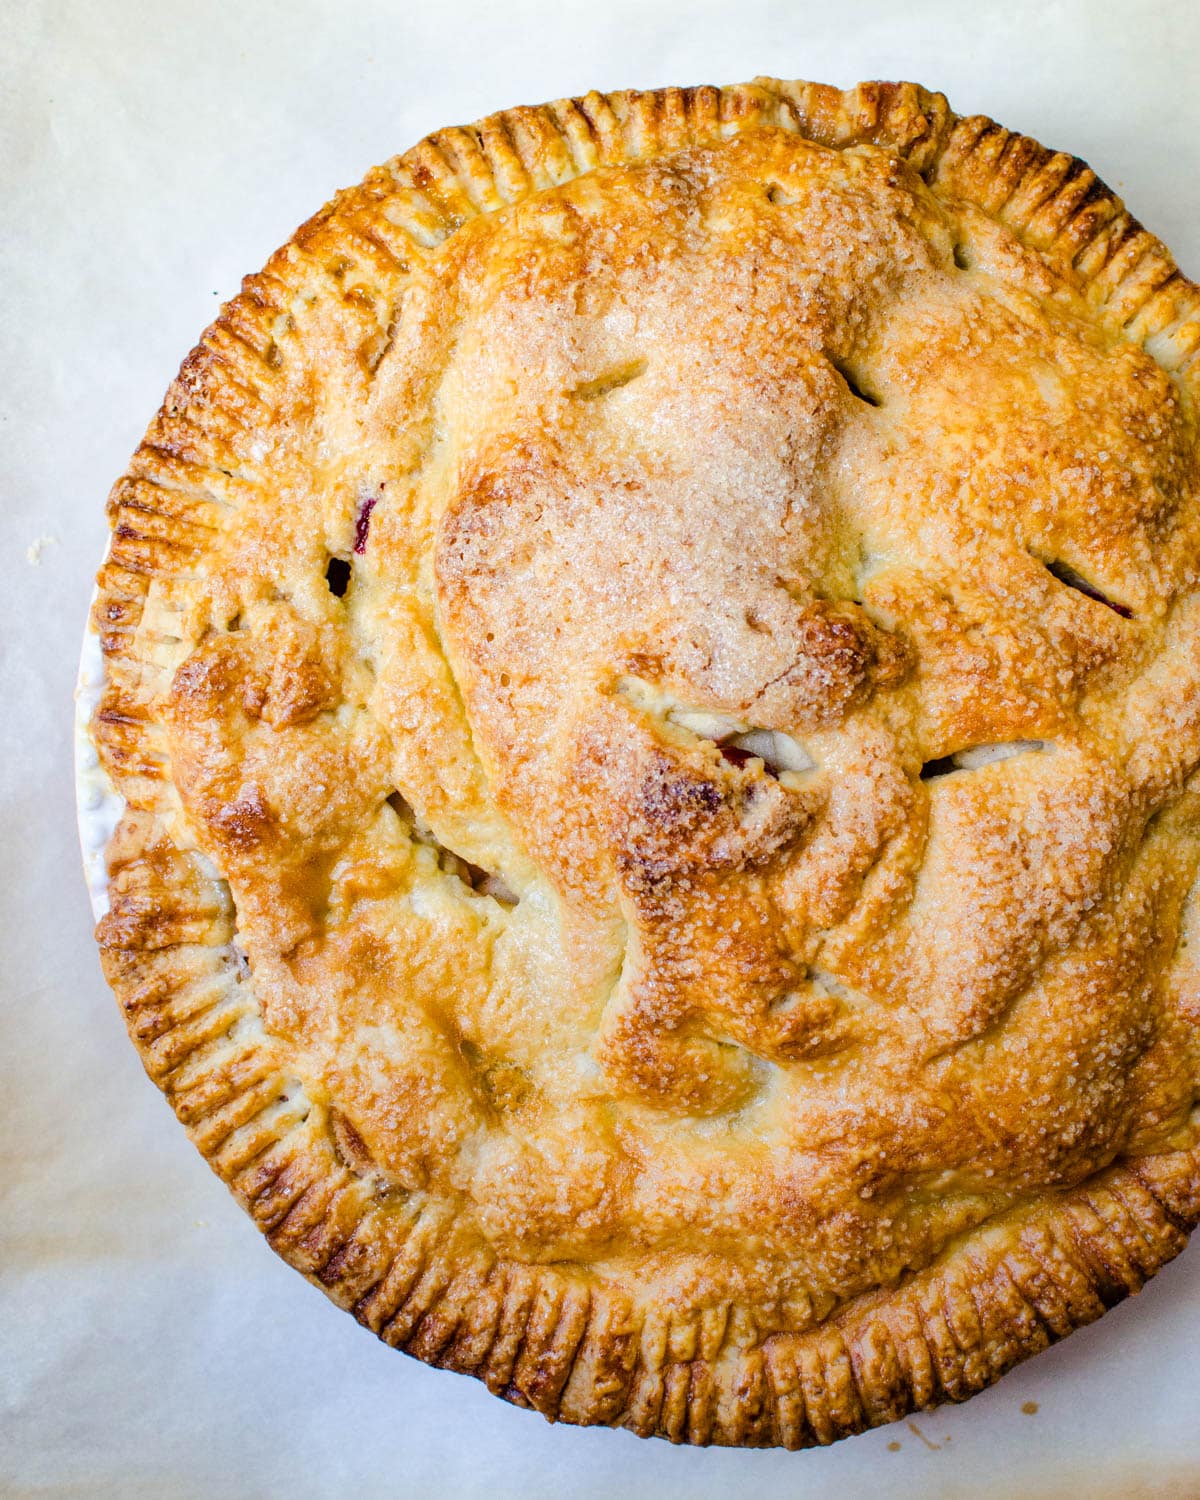 A baked apple pie.